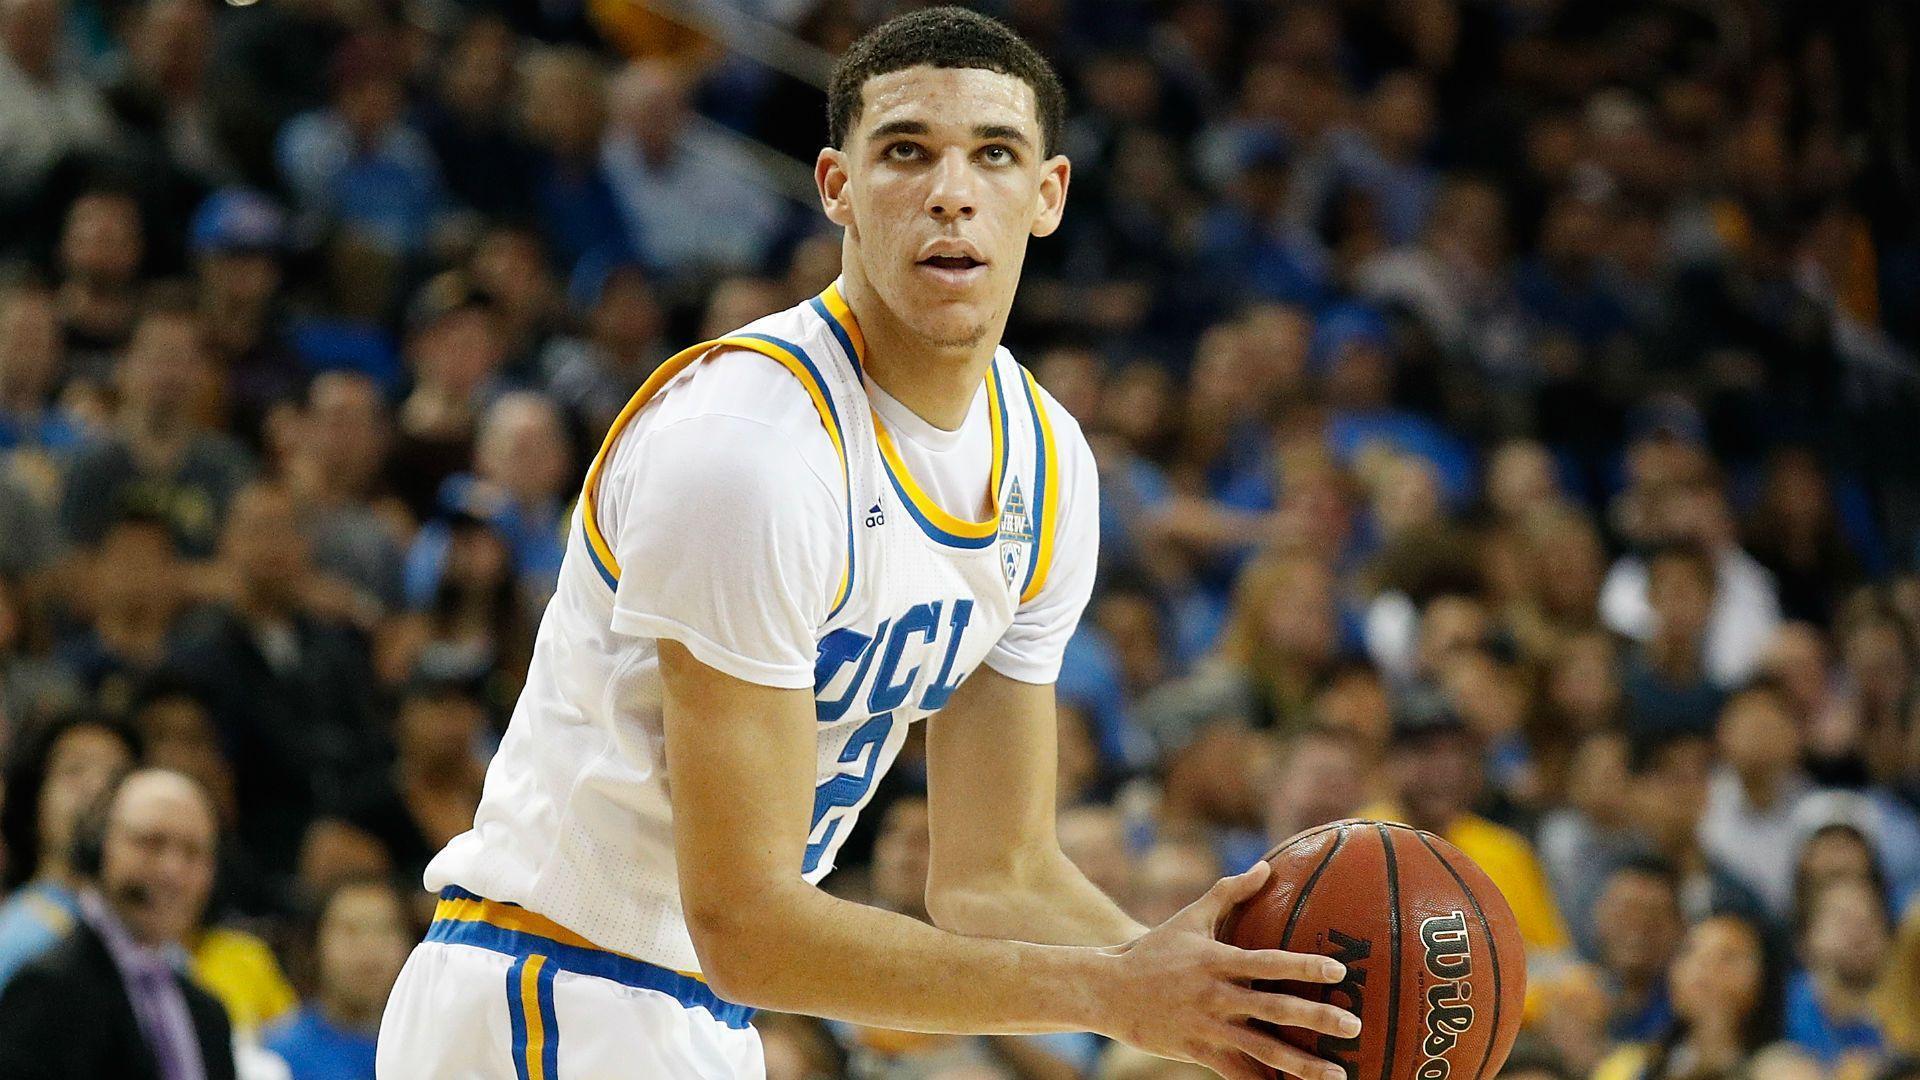 Lonzo Ball's dad clarifies comment about UCLA star playing only